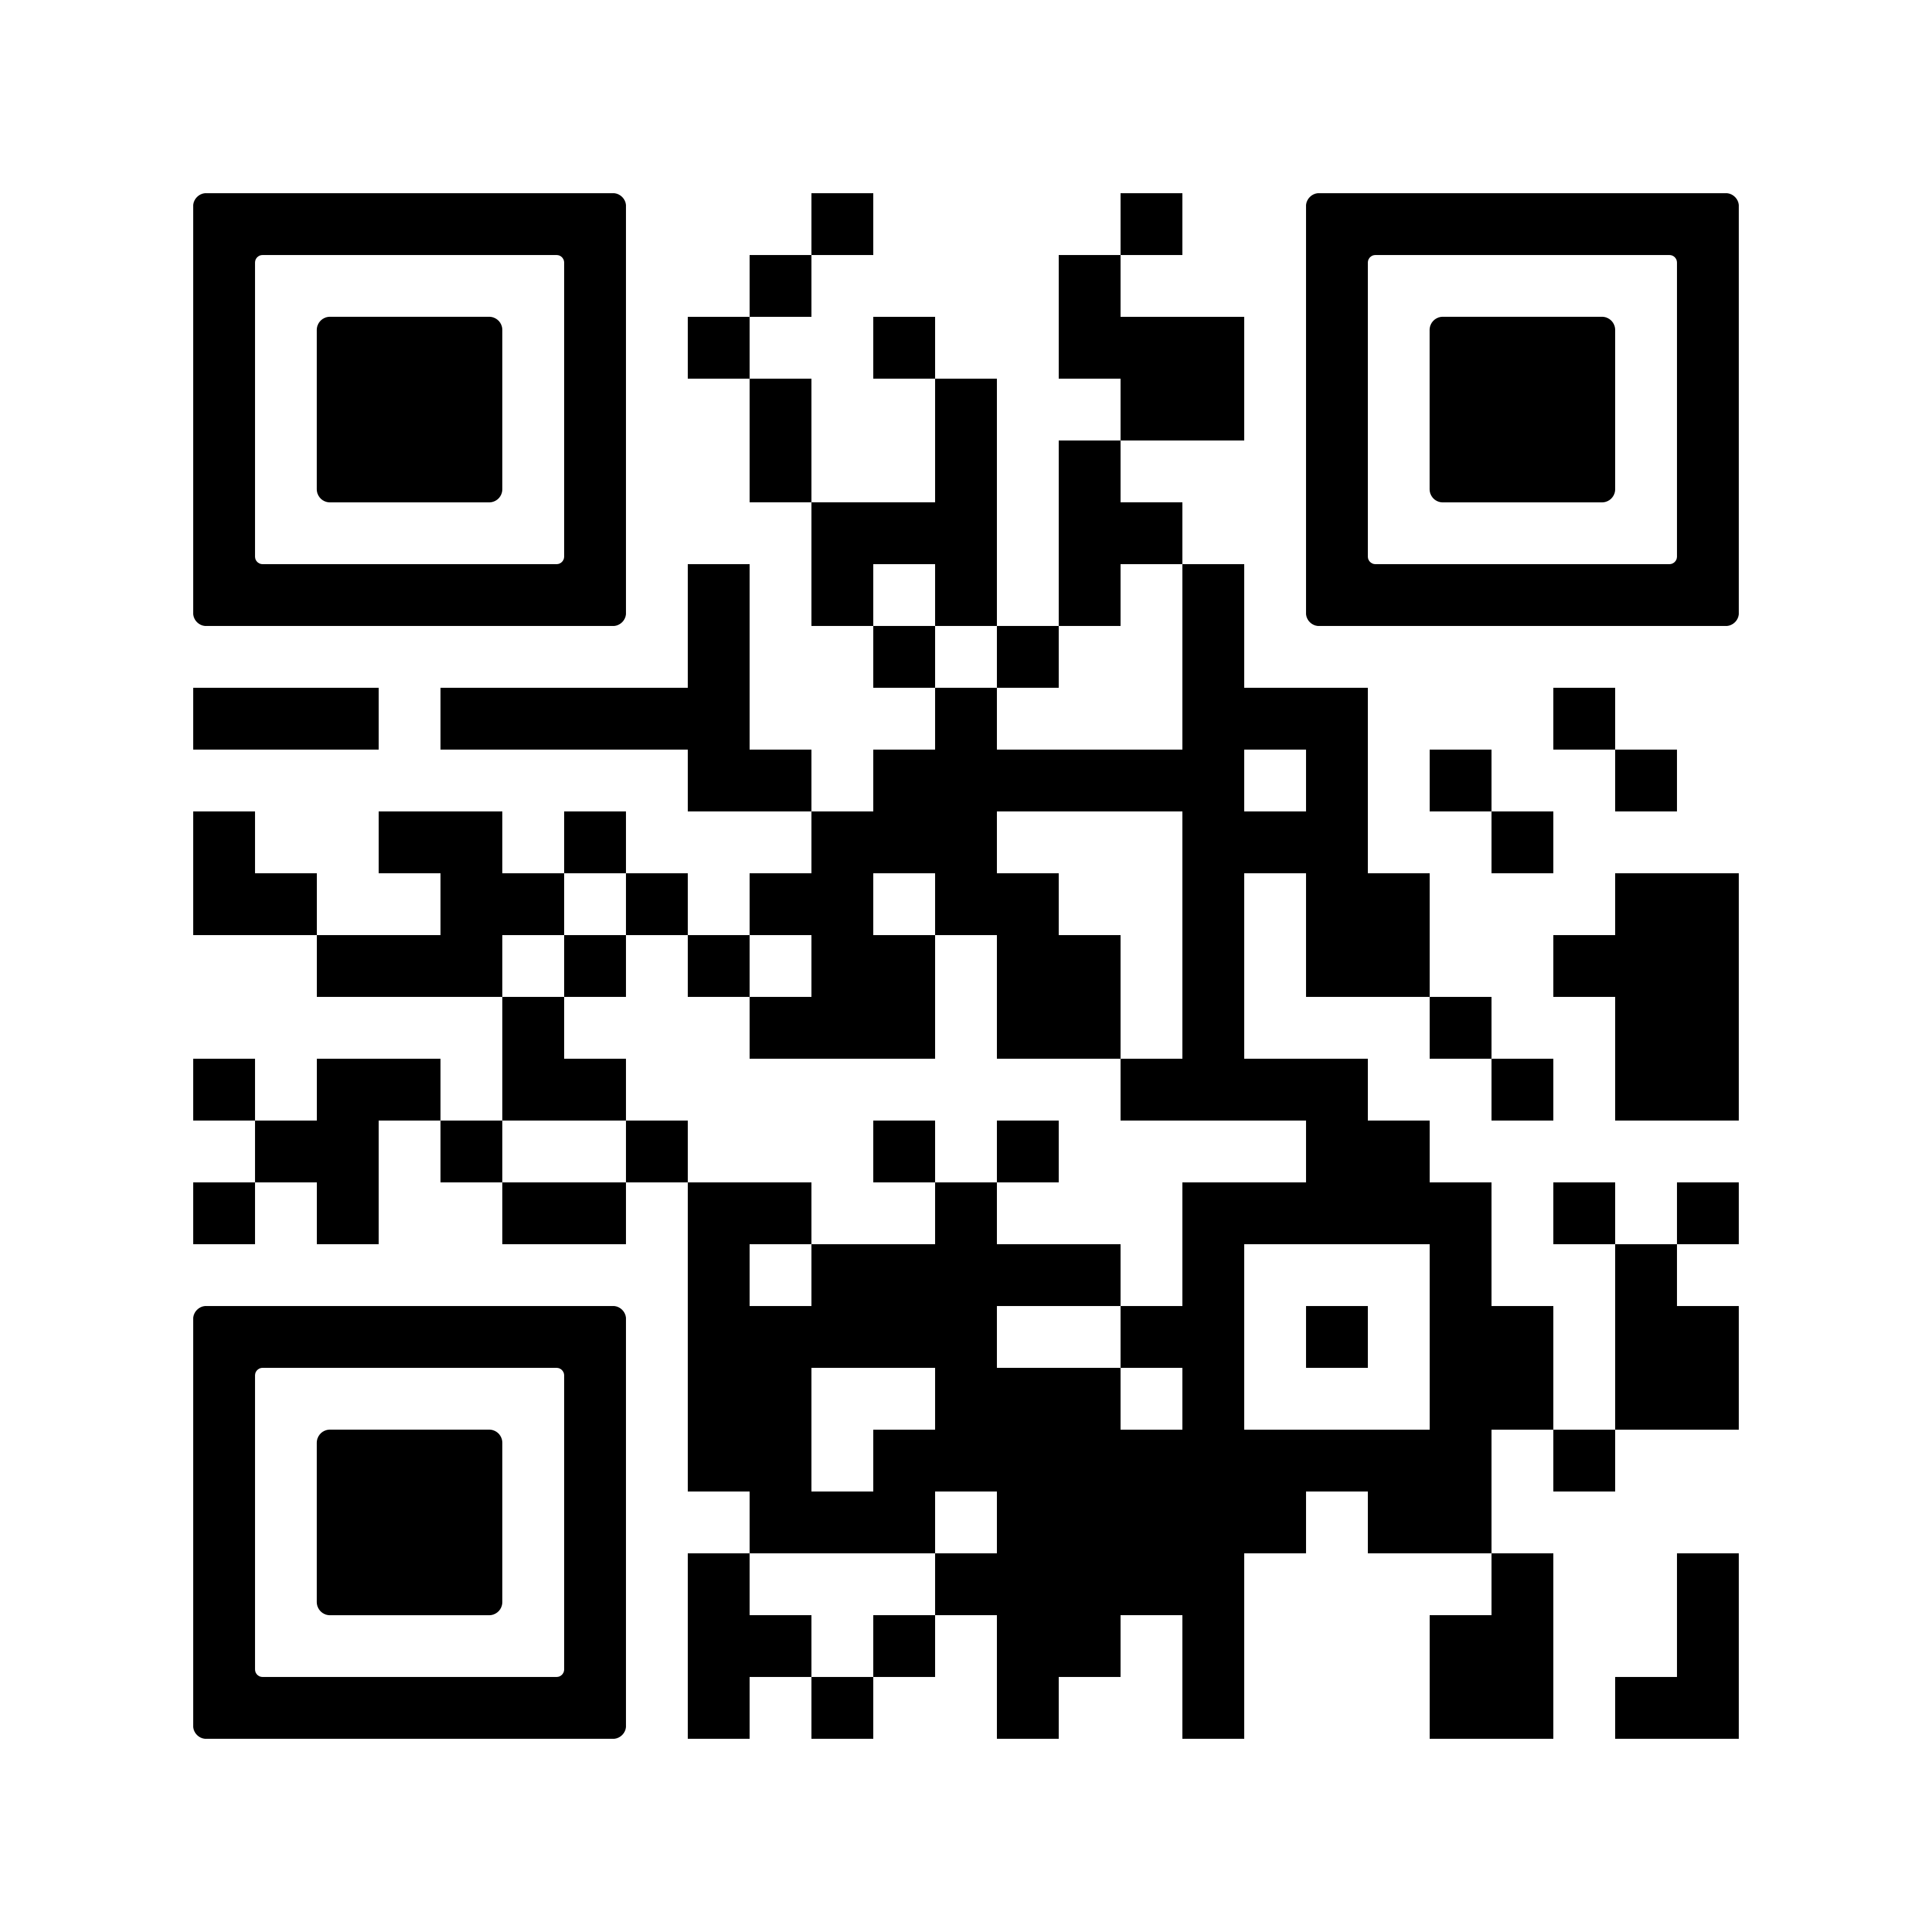 QR Code Generator: What Is a QR Code & How To Create One